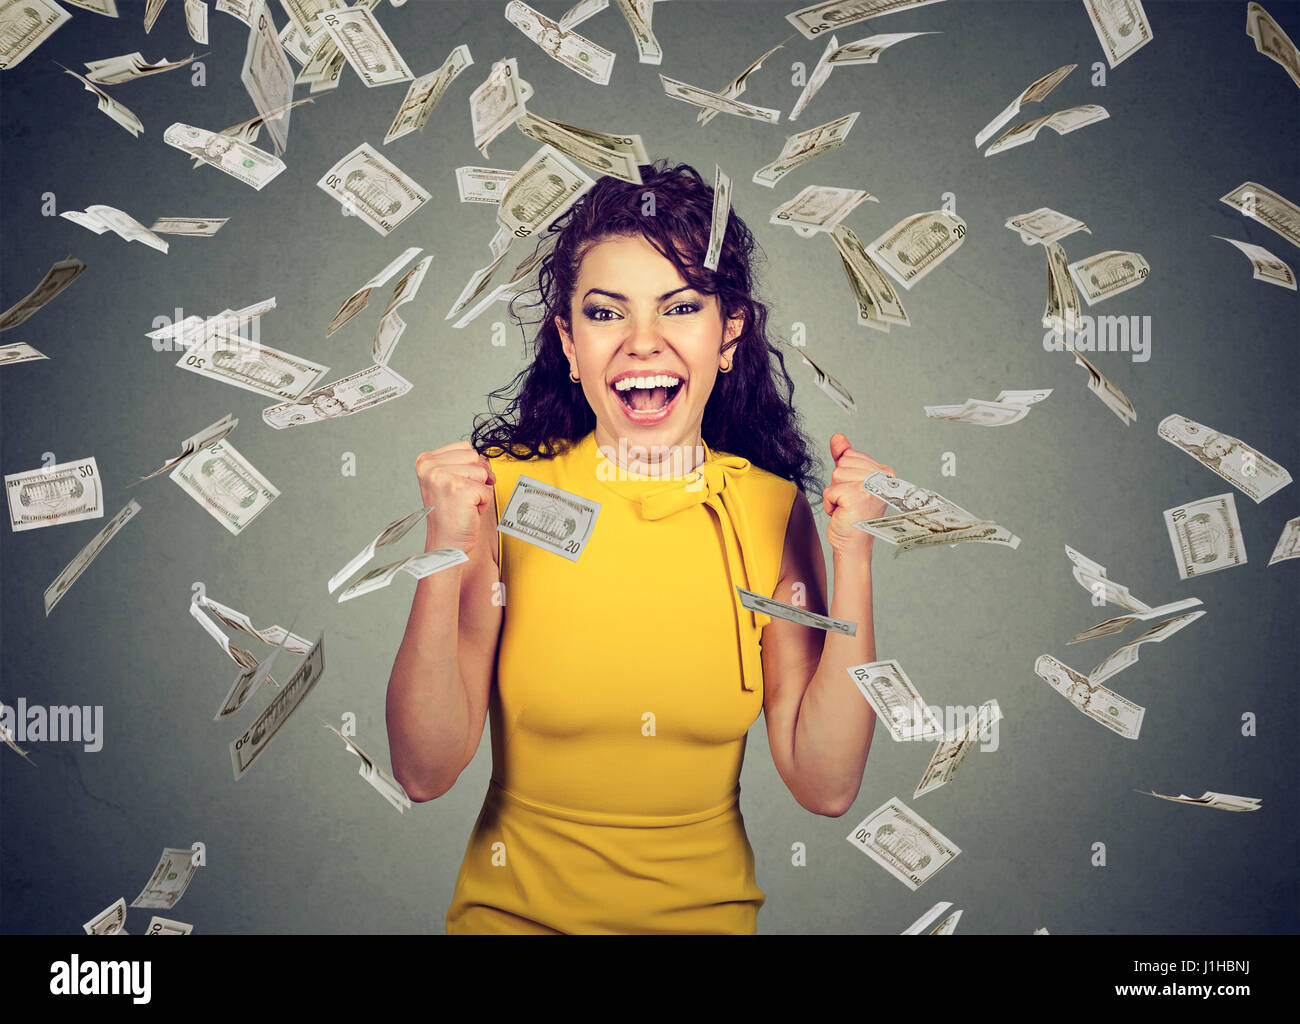 Portrait happy woman pumping fists ecstatic celebrates success under a money rain falling down dollar bills banknotes isolated on gray wall background Stock Photo